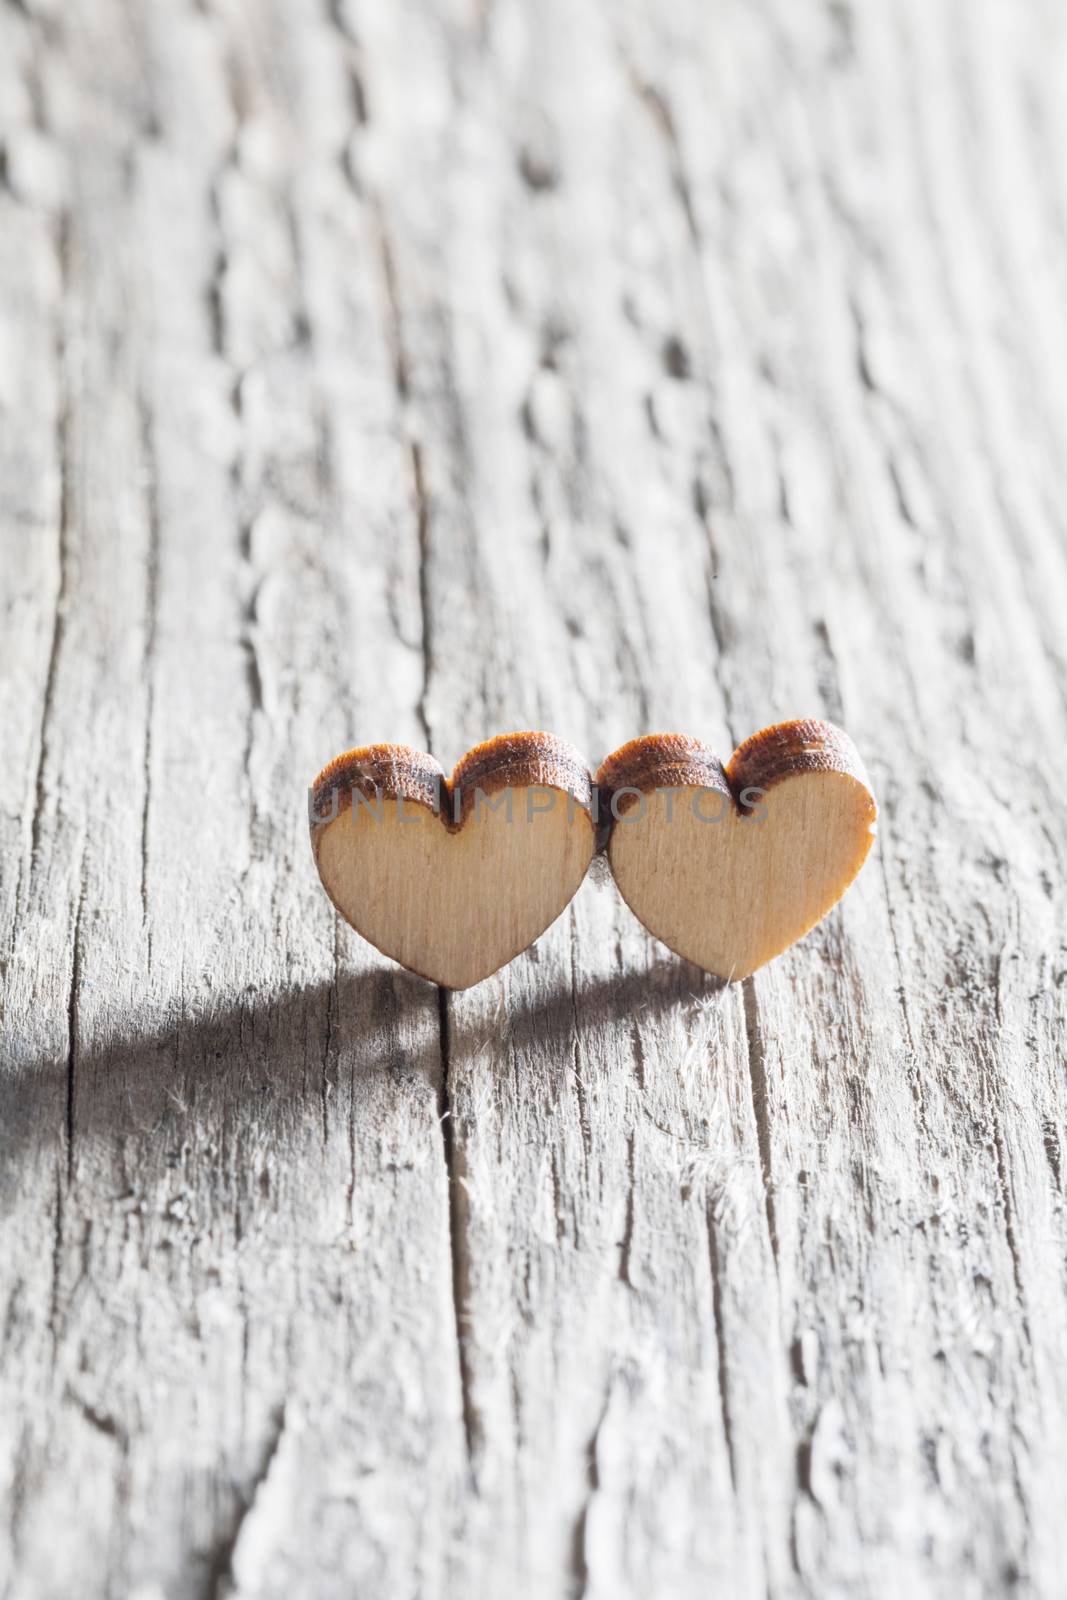 Two small wooden hearts on old cracked wood background